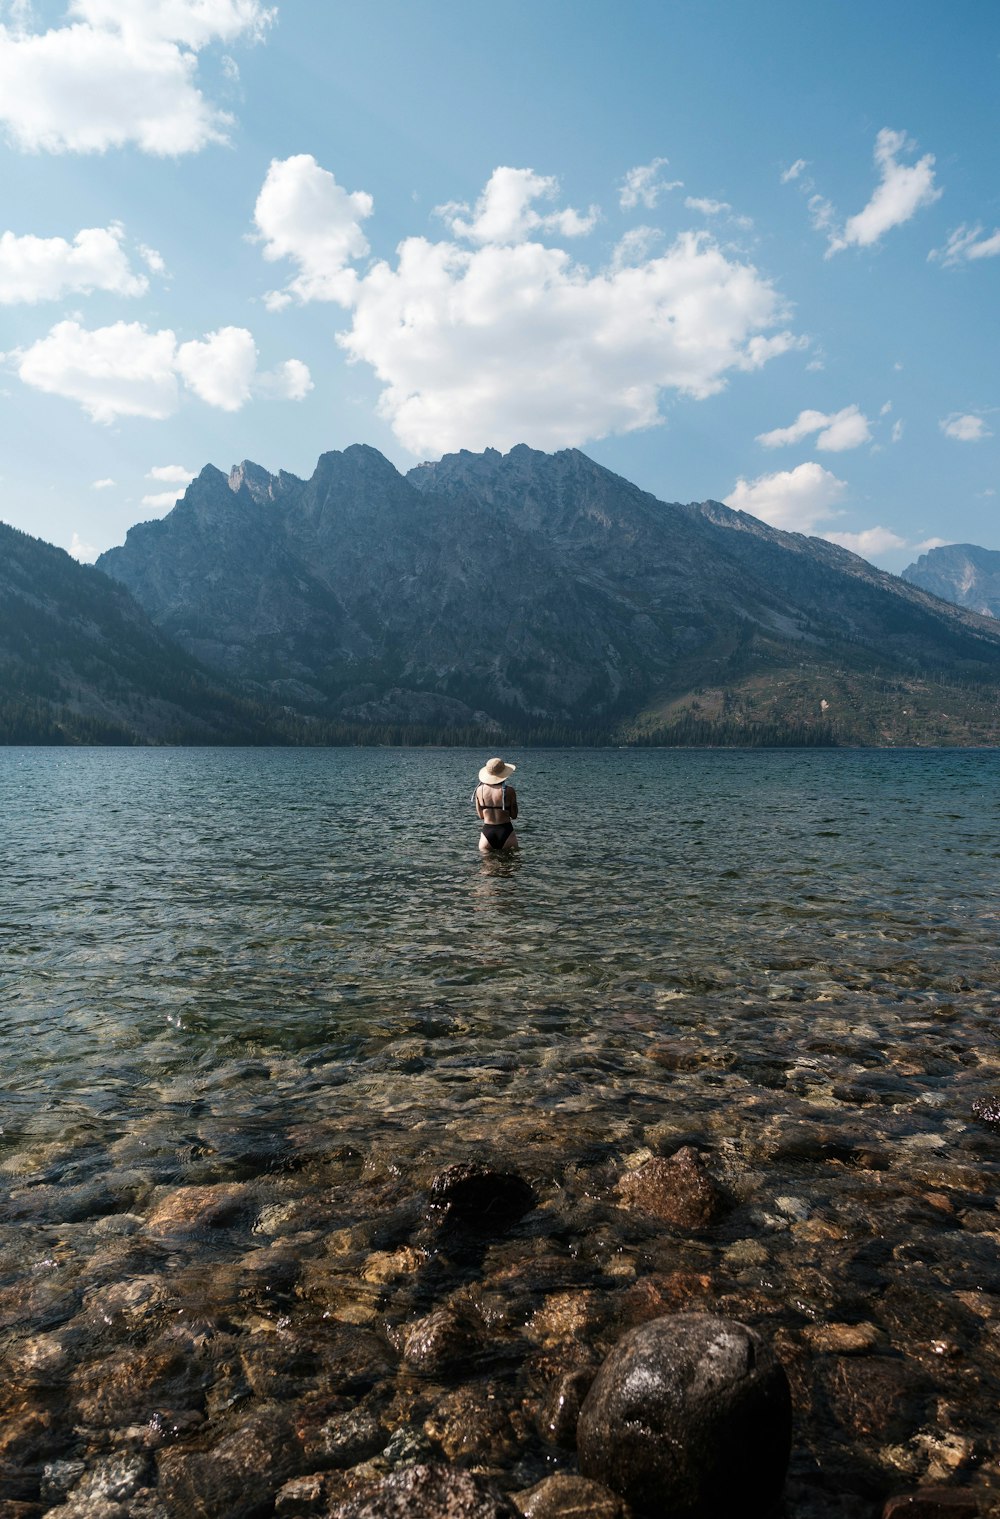 a man wading in a lake with mountains in the background